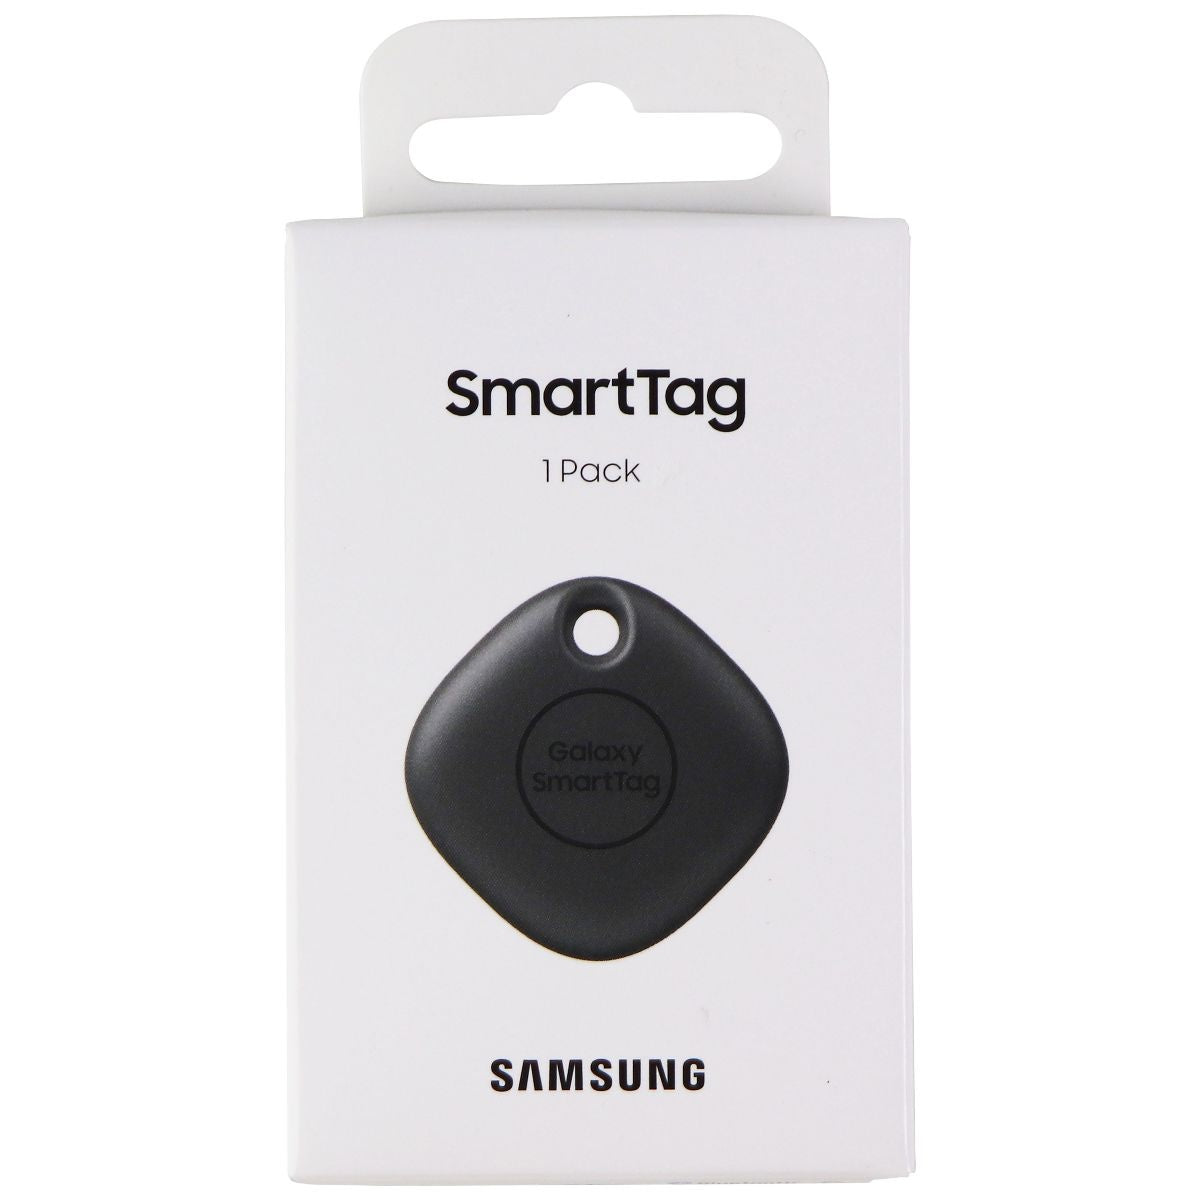 Samsung Galaxy SmartTag Bluetooth Tracker & Item Locator - Black GPS Accessories & Tracking - Tracking Devices Samsung    - Simple Cell Bulk Wholesale Pricing - USA Seller